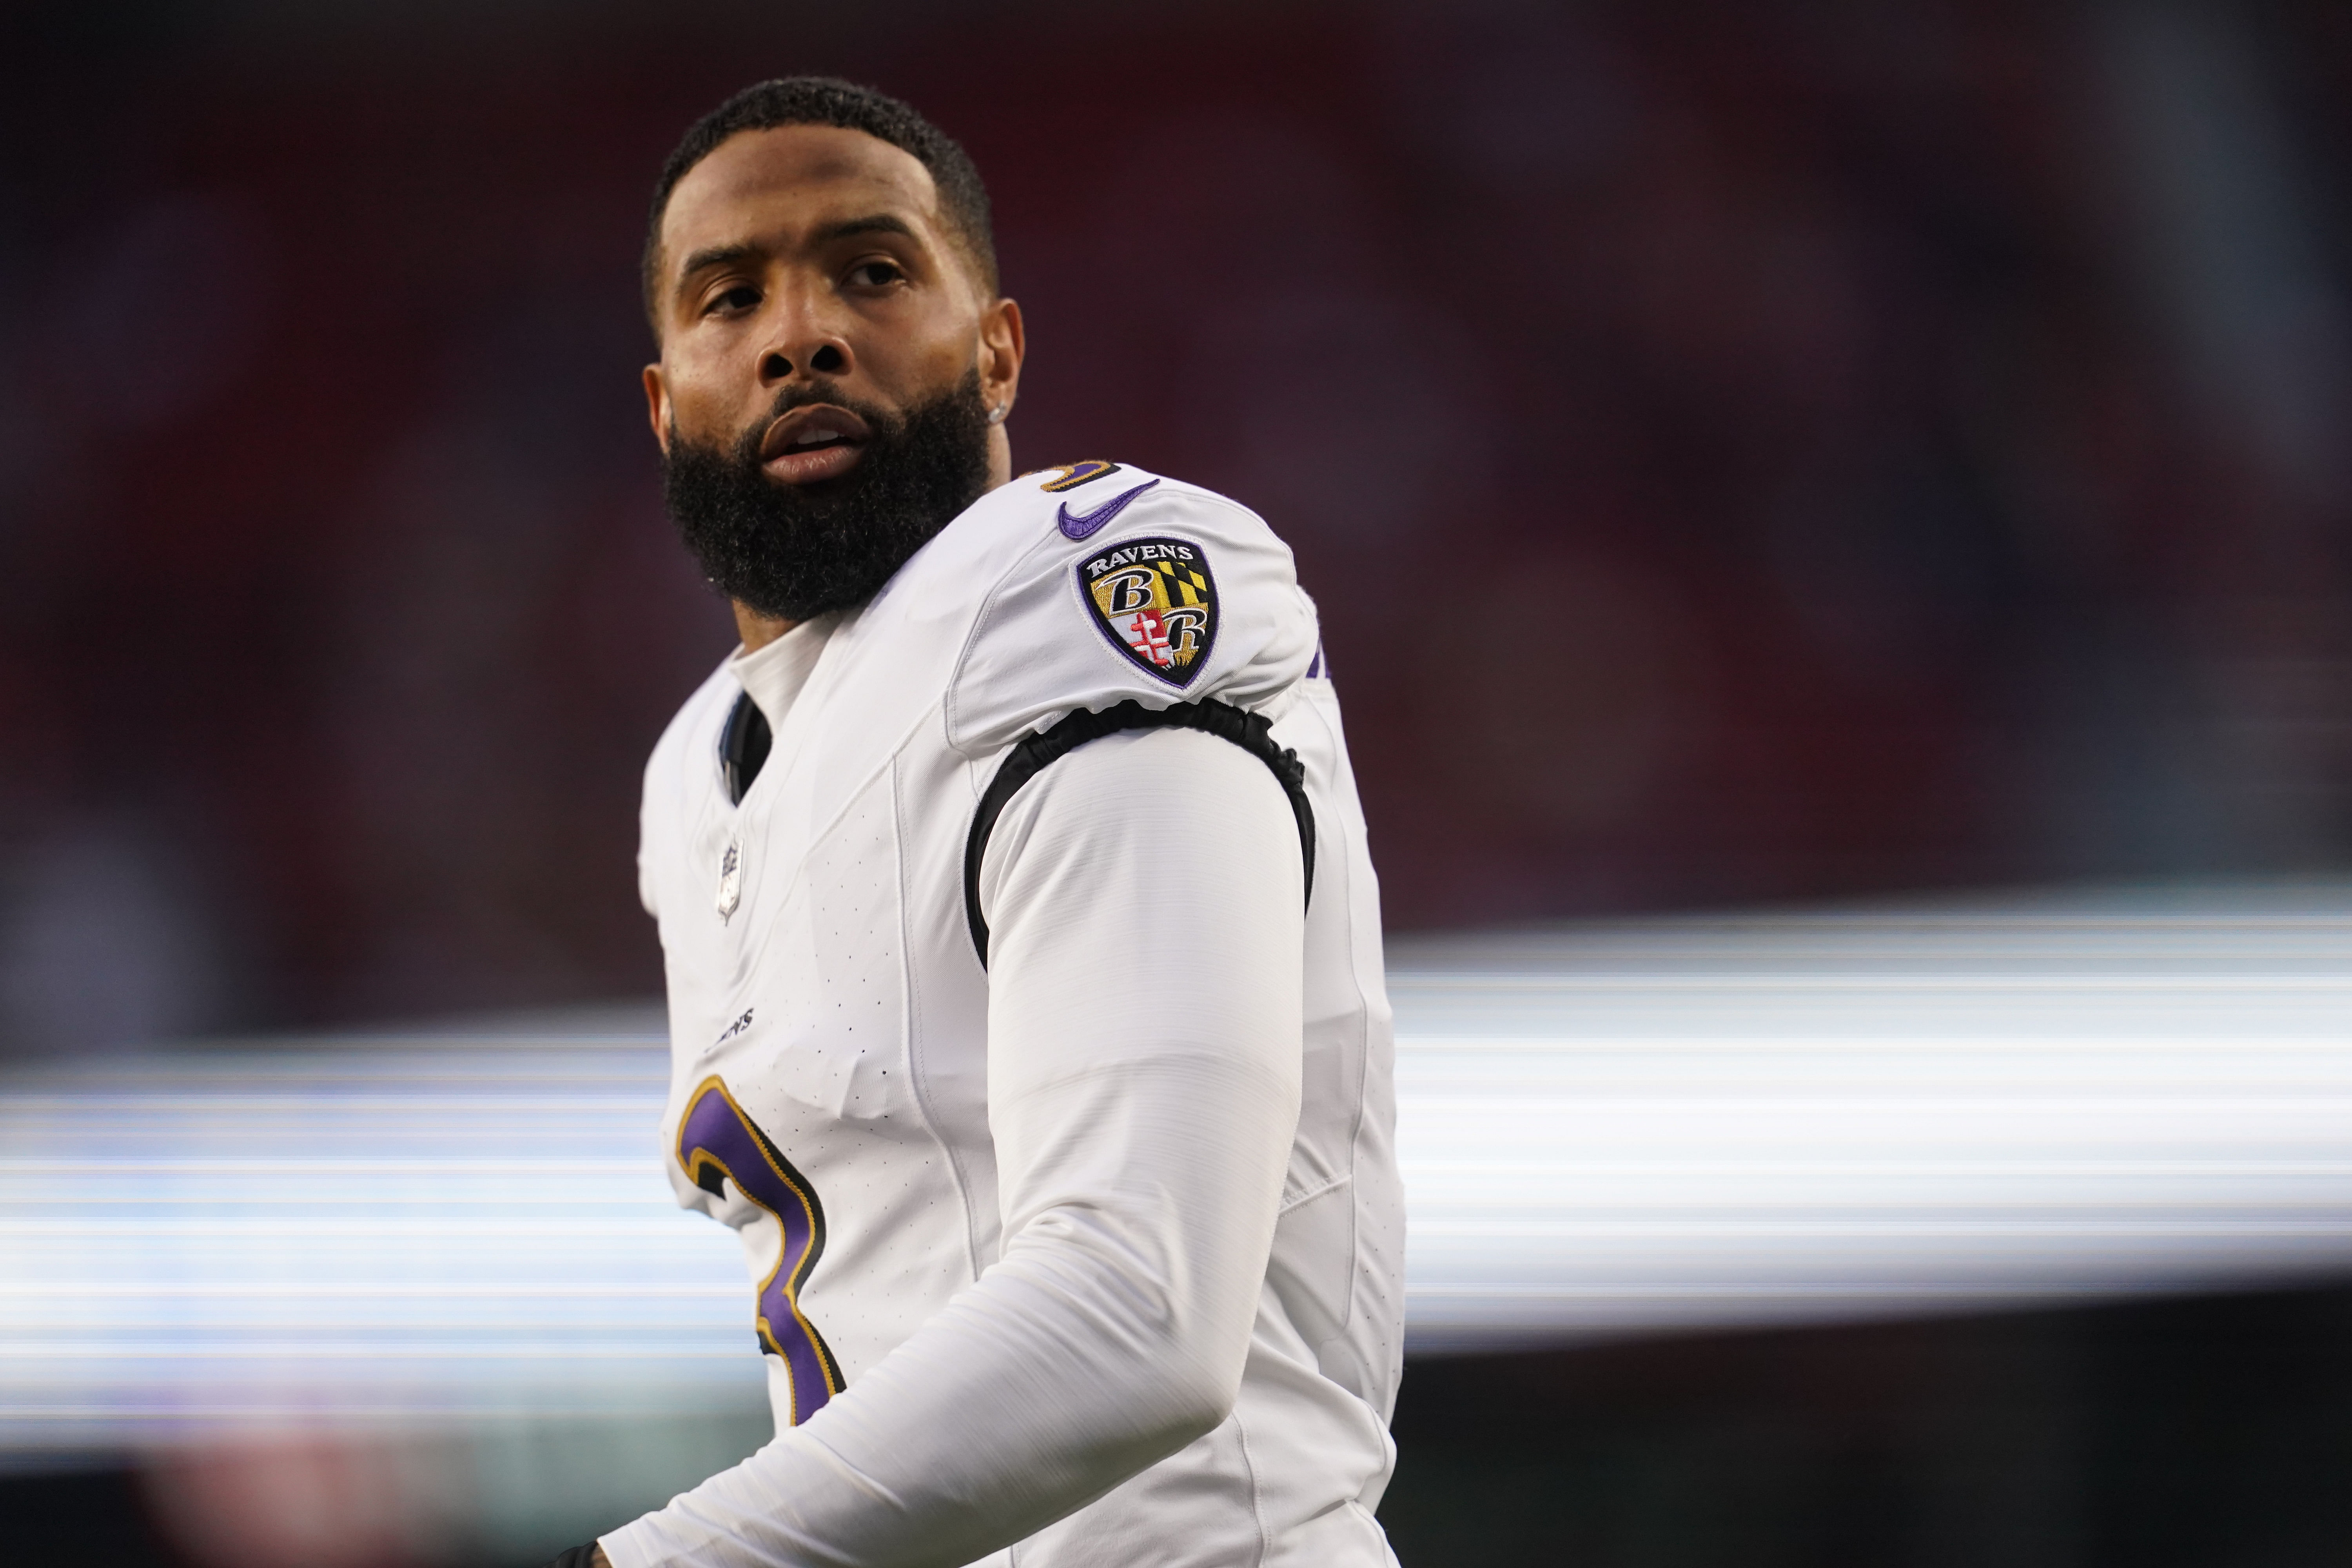 Top 20 NFL free agents still on the market feat. Odell Beckham Jr